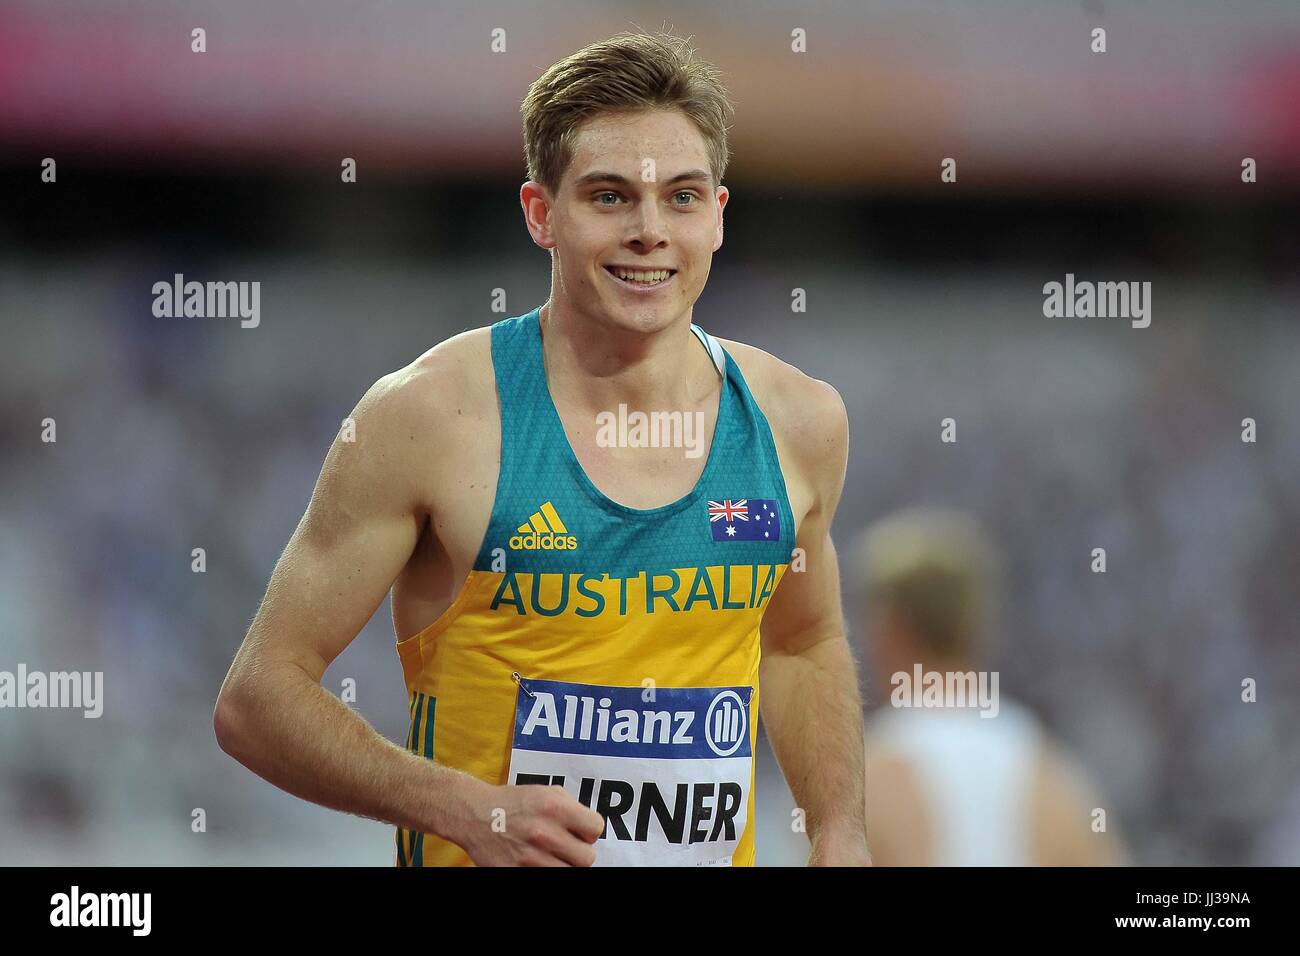 Stratford, UK. 17th Jul, 2017. James Turner (AUS) in the mens 200m T36 final. World para athletics championships. London Olympic stadium. Queen Elizabeth Olympic park. Stratford. London. UK.  Credit: Sport In Pictures/Alamy Live News Stock Photo